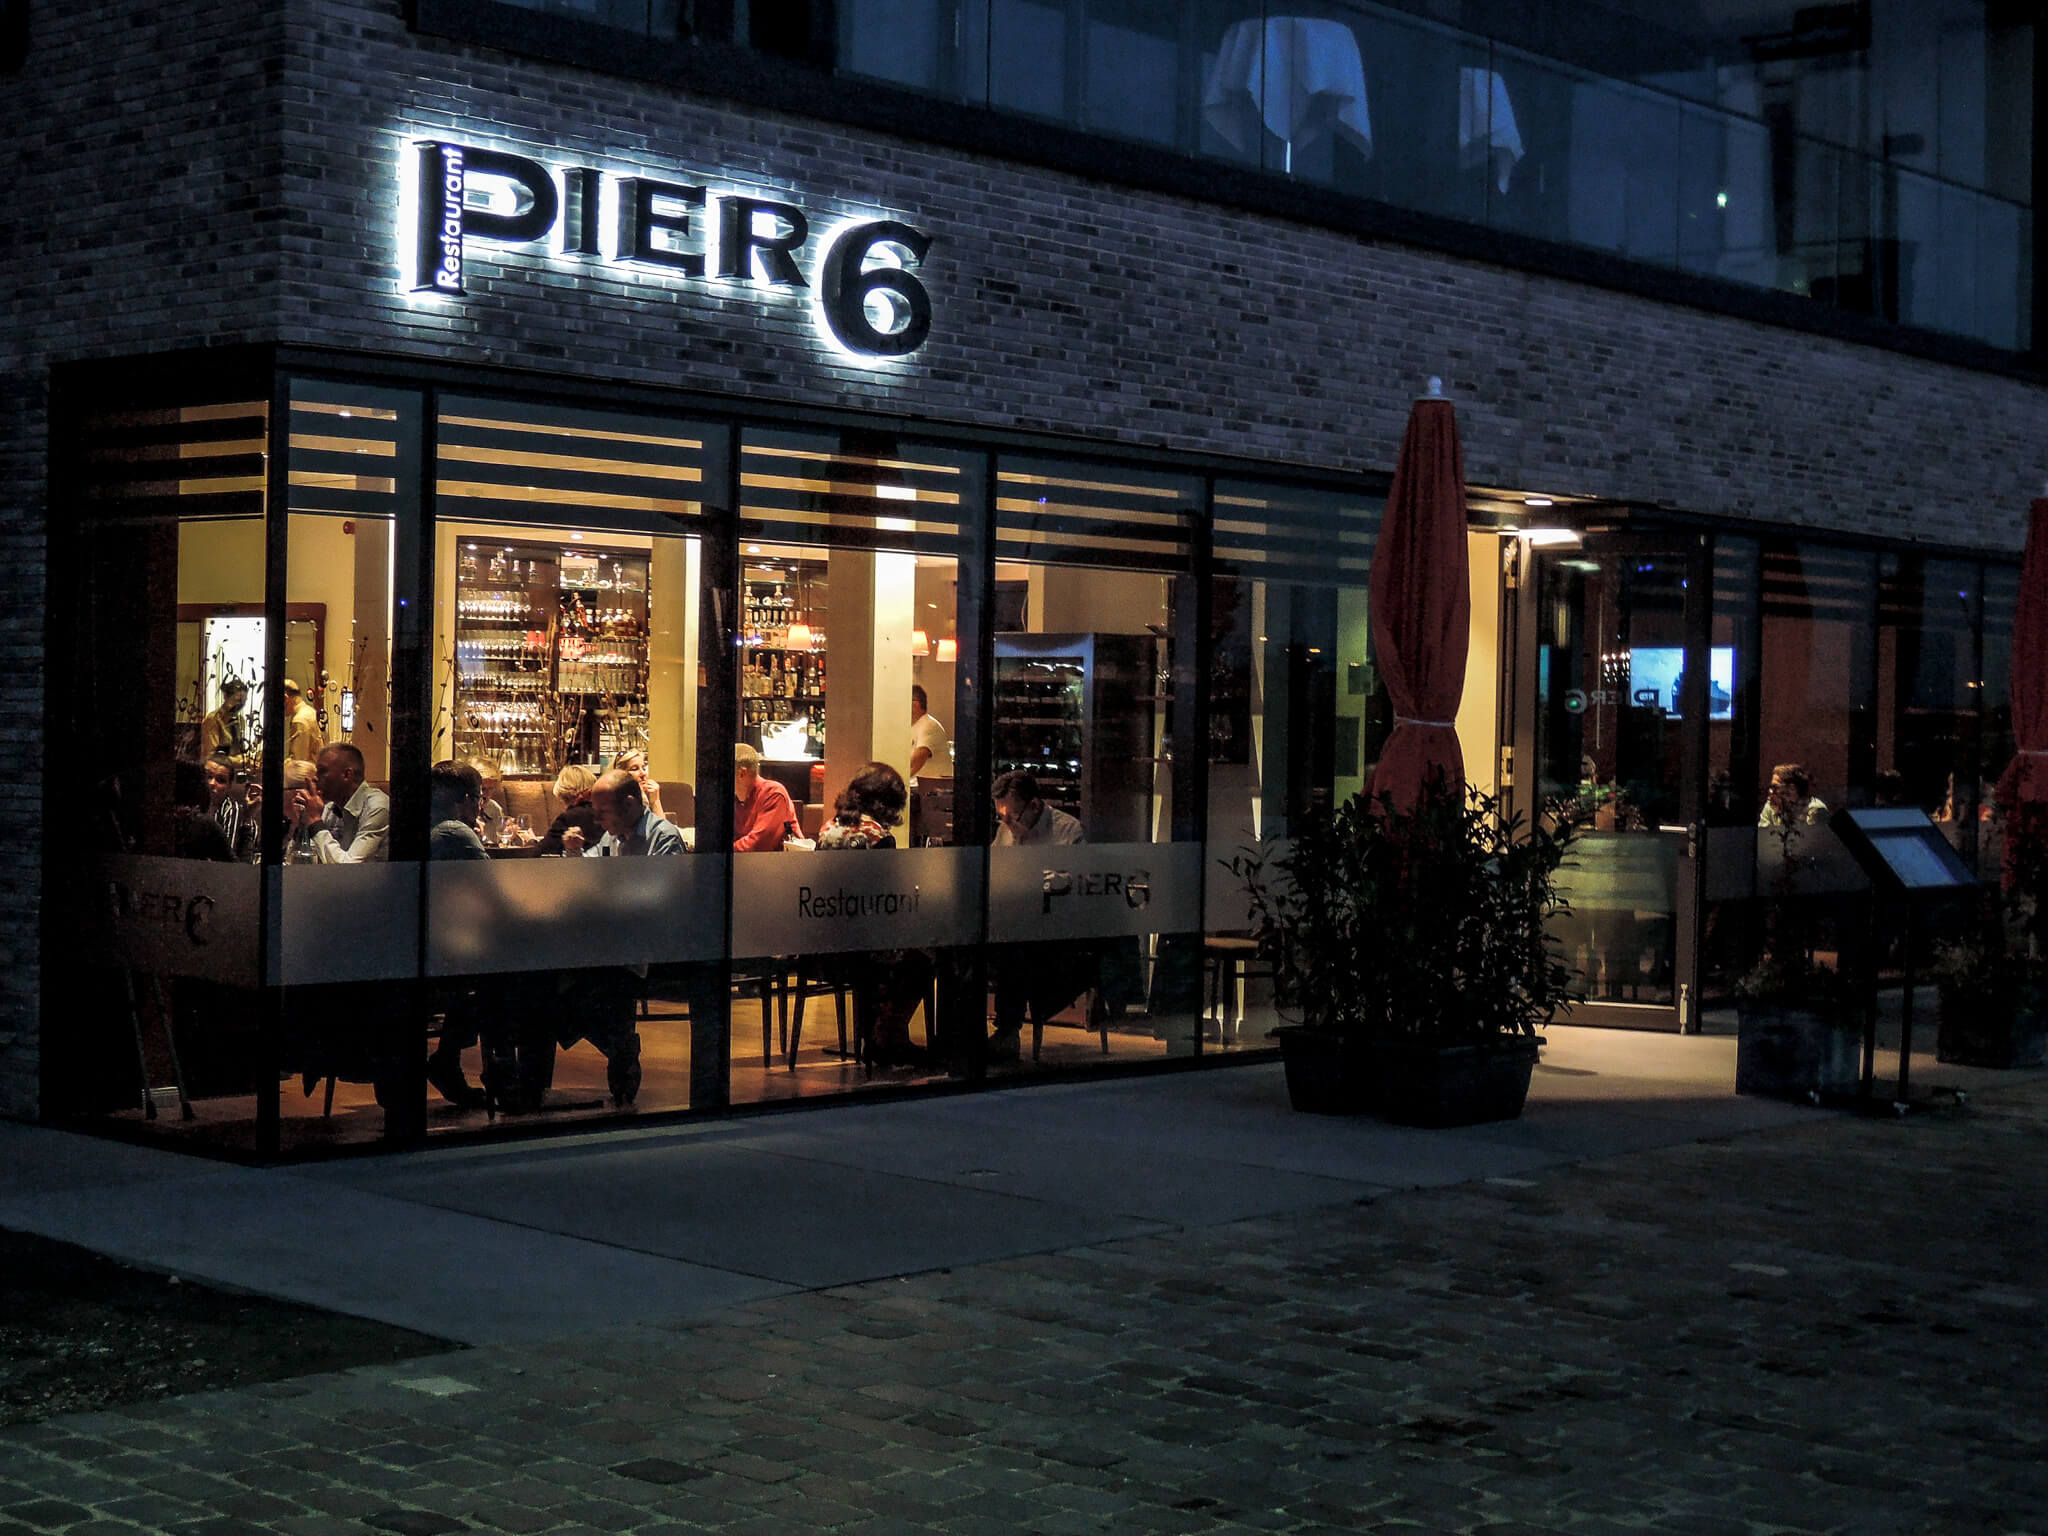 Robust ventilation enables inside dining at the 'Pier 6' even in times of Covid